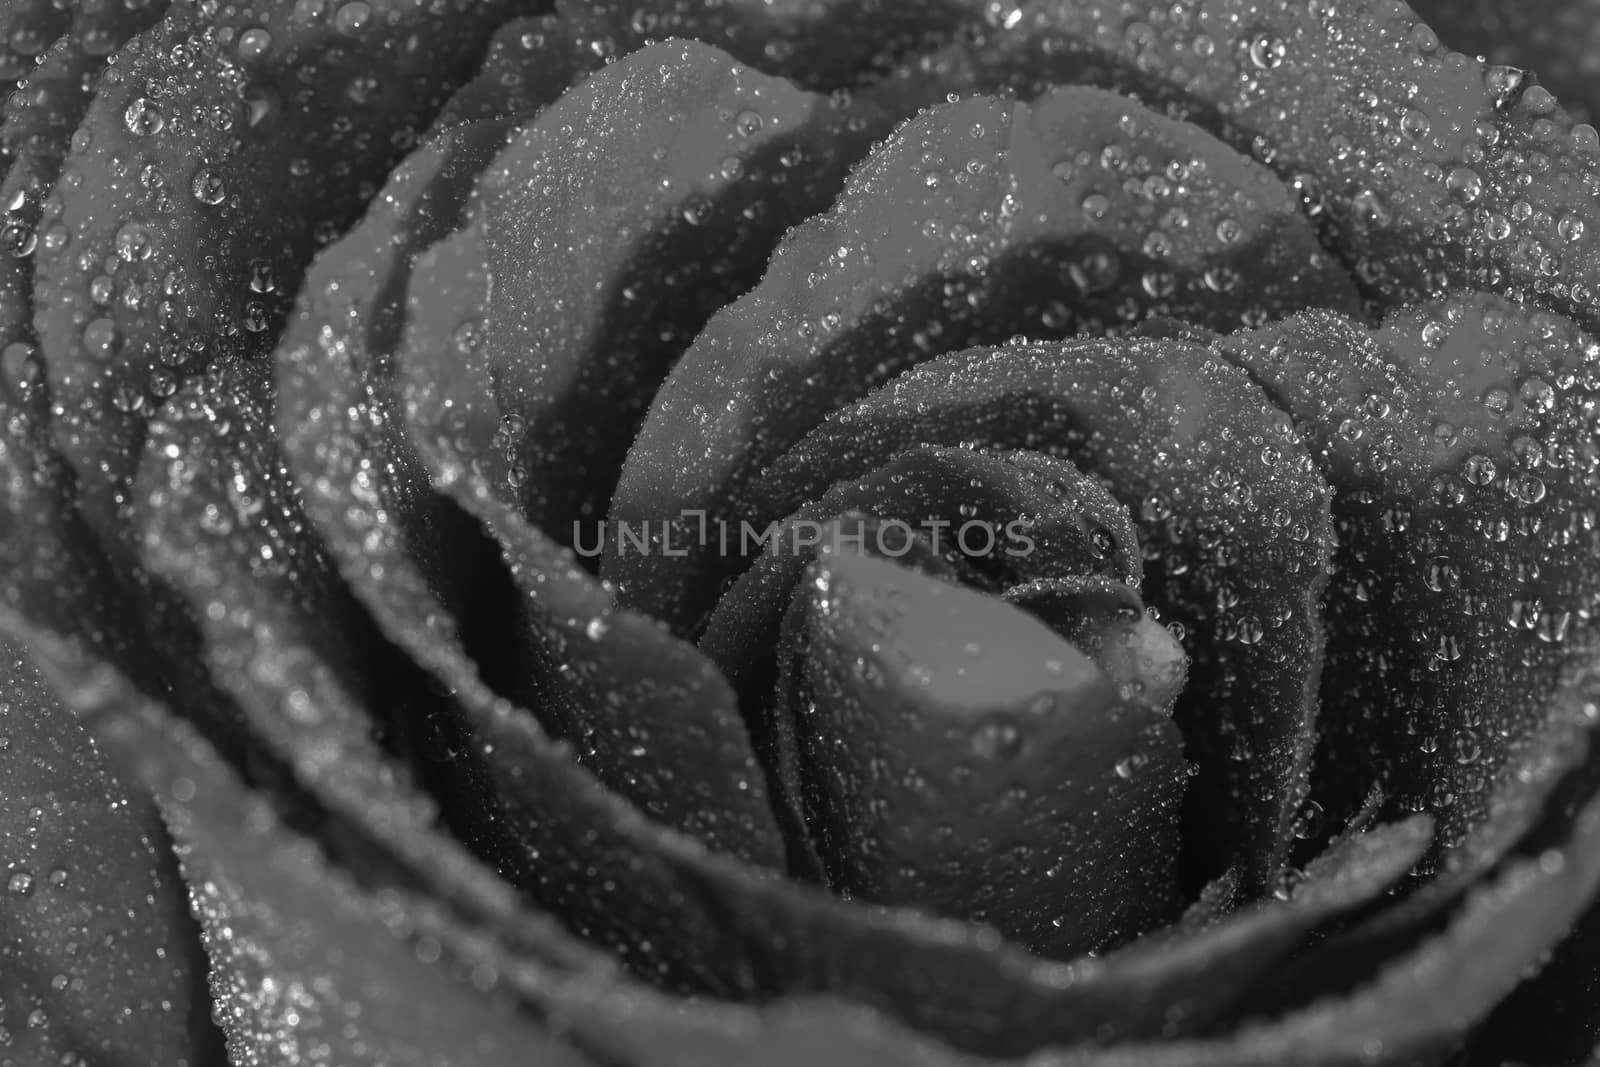 Rose flower with water droplets by wyoosumran